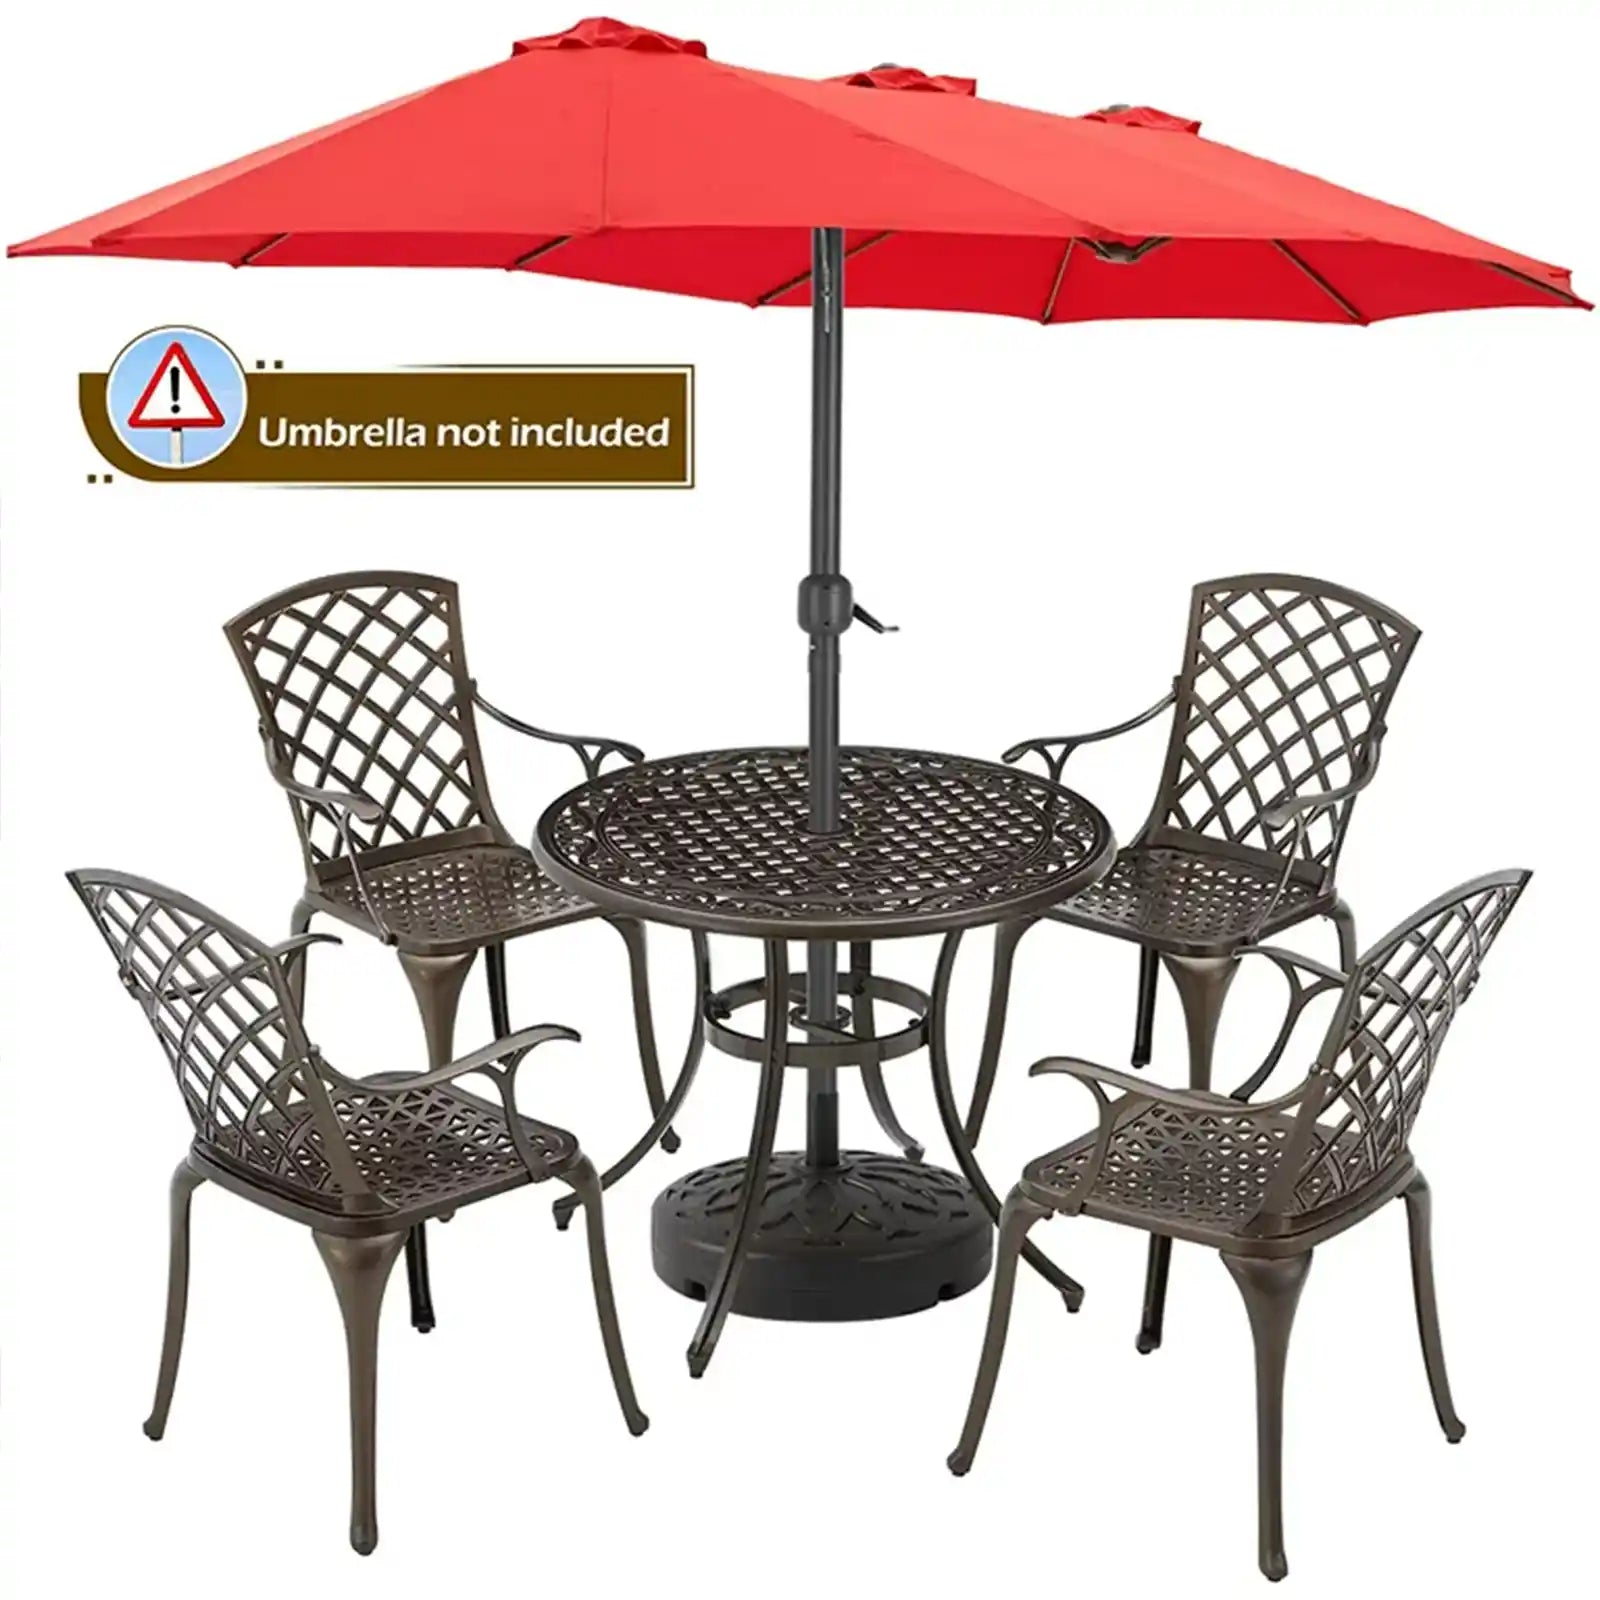 5 Pieces Patio Dining Set, Cast Aluminum Outdoor Furniture Conversation Set with Round Table